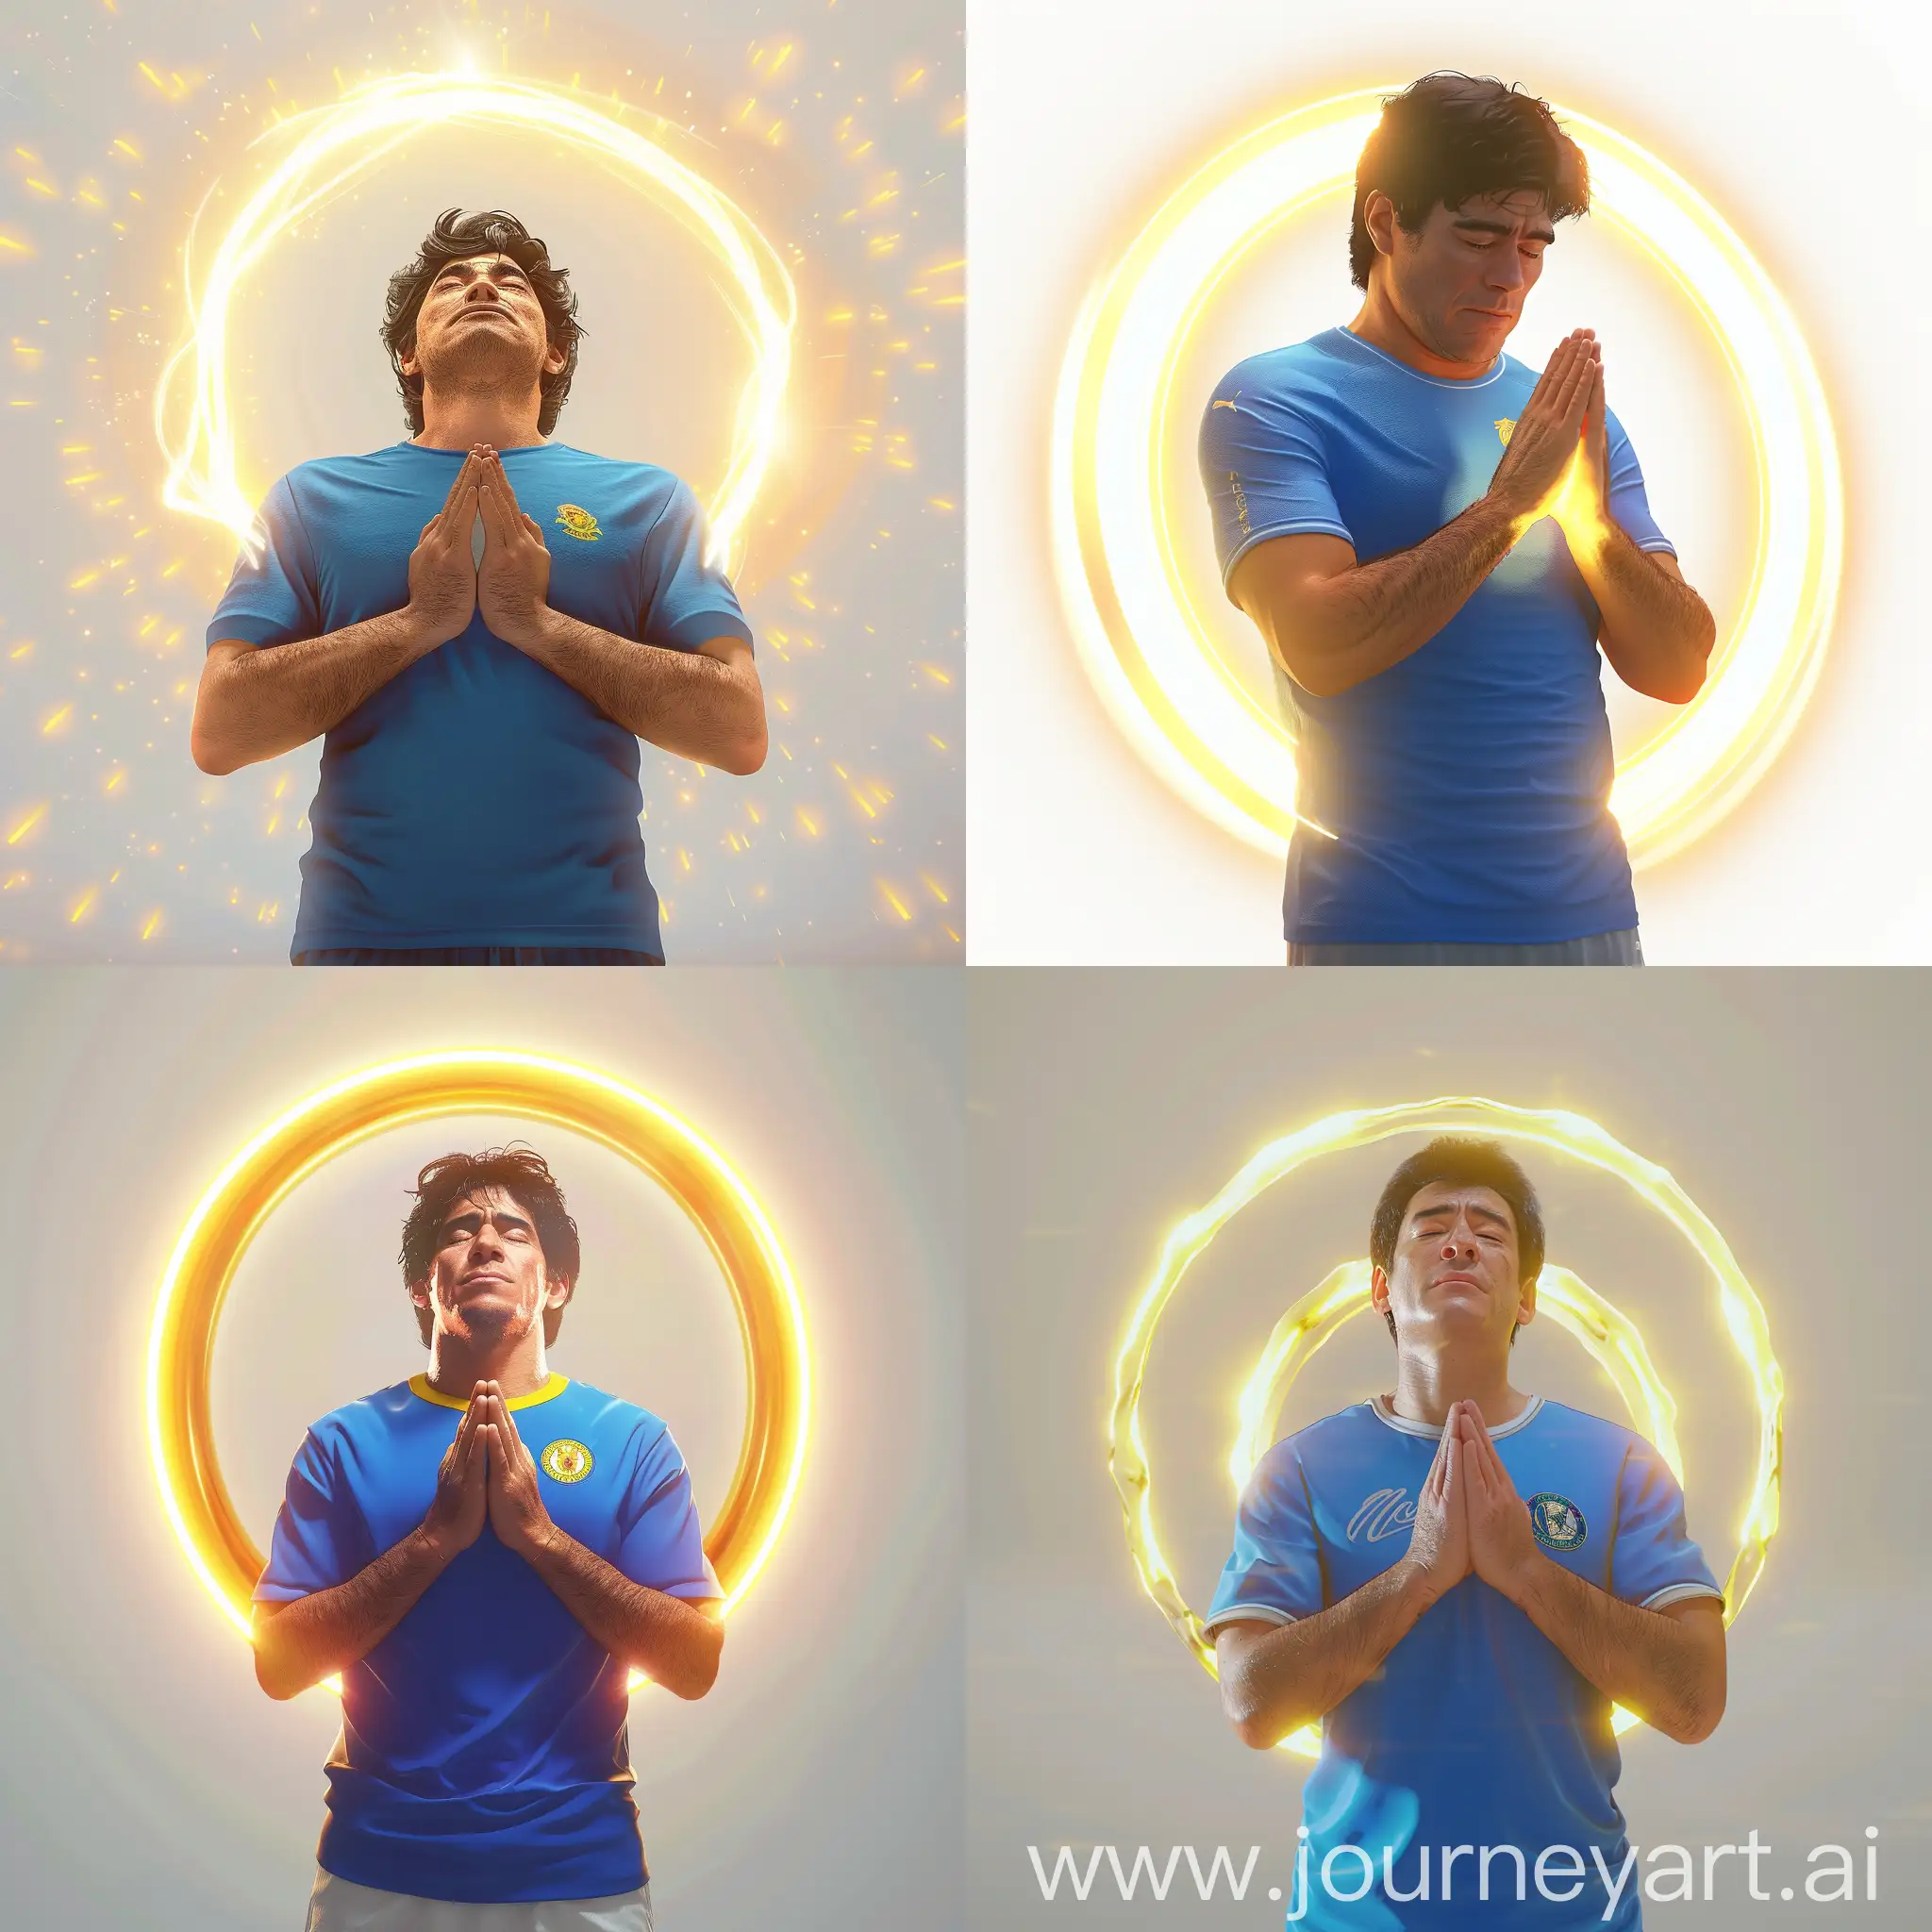 Maradona Praying with Blue T-shirt in Cartoonic Style, Yellow Light Ring in Luminous White Background, 3d Rendering, High-Res 